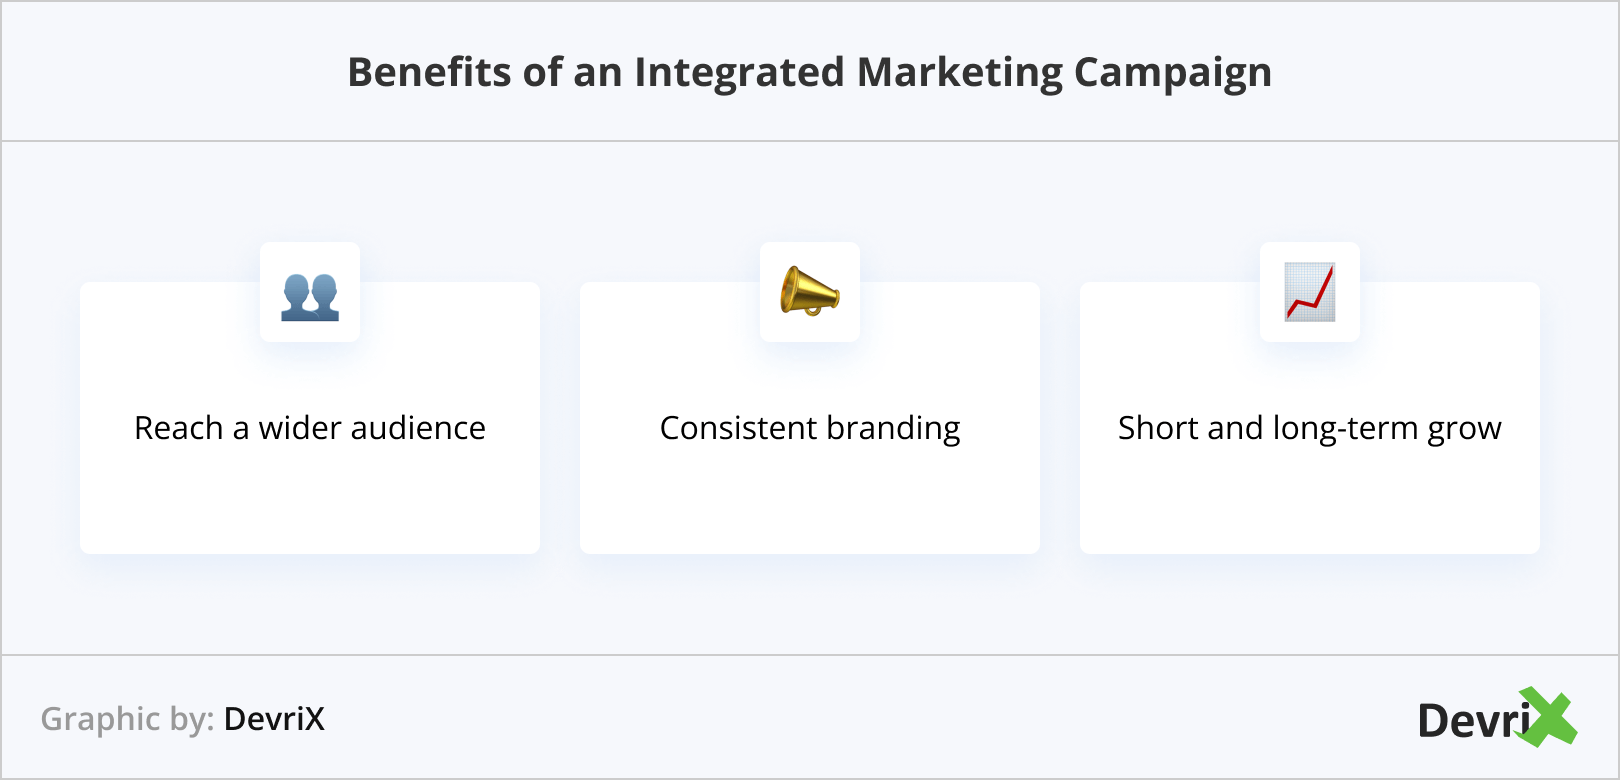 Benefits of an Integrated Marketing Campaign